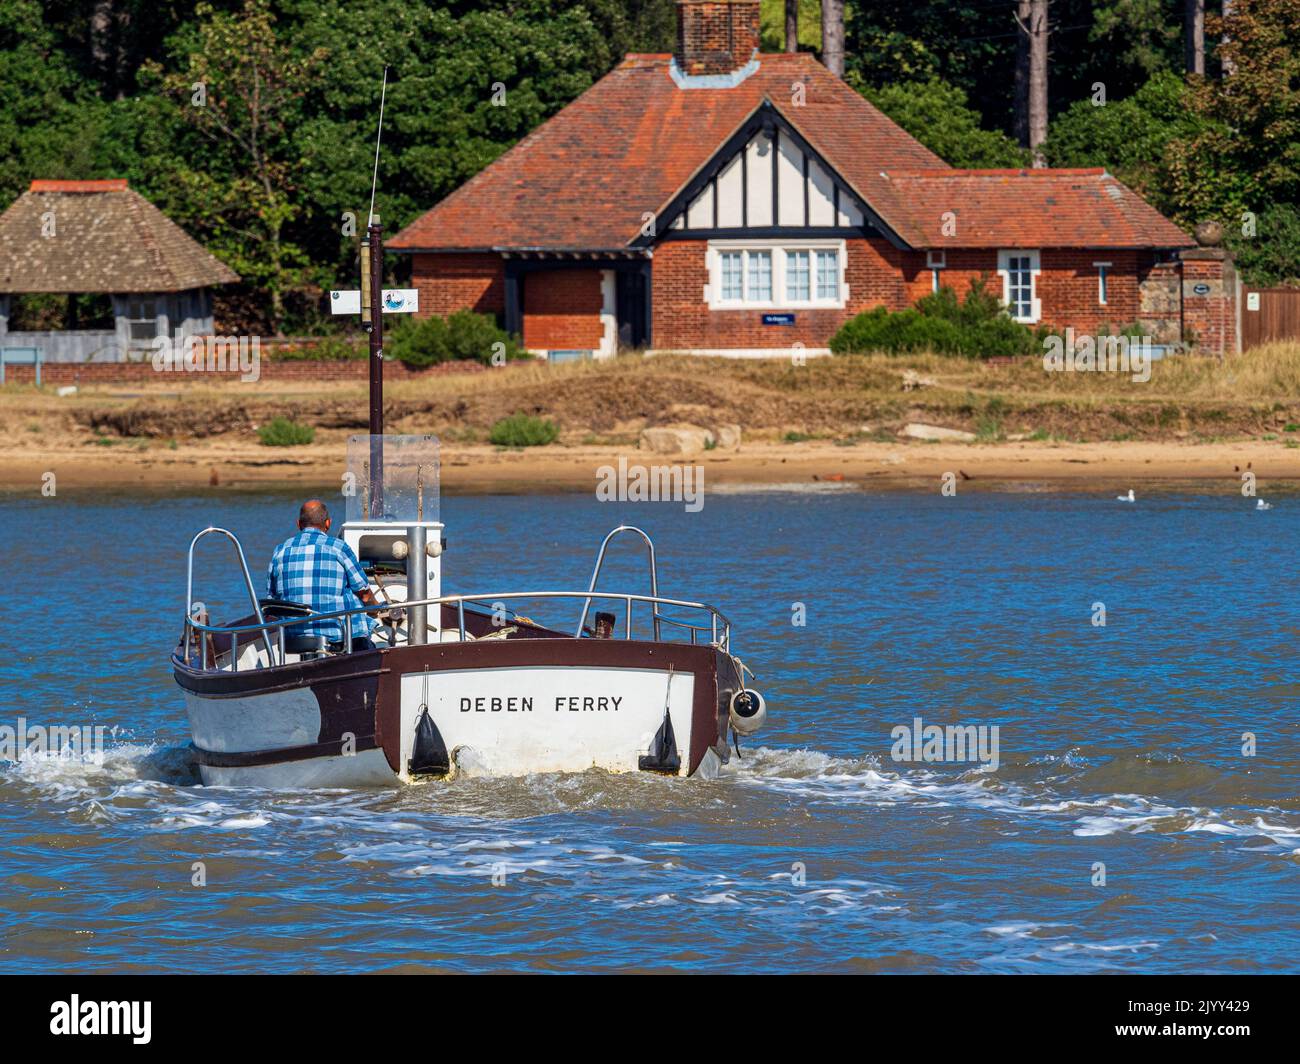 River Deben Ferry runs from Felixstowe Ferry to Bawdsey Quay on the River Deben in Suffolk UK. Stock Photo